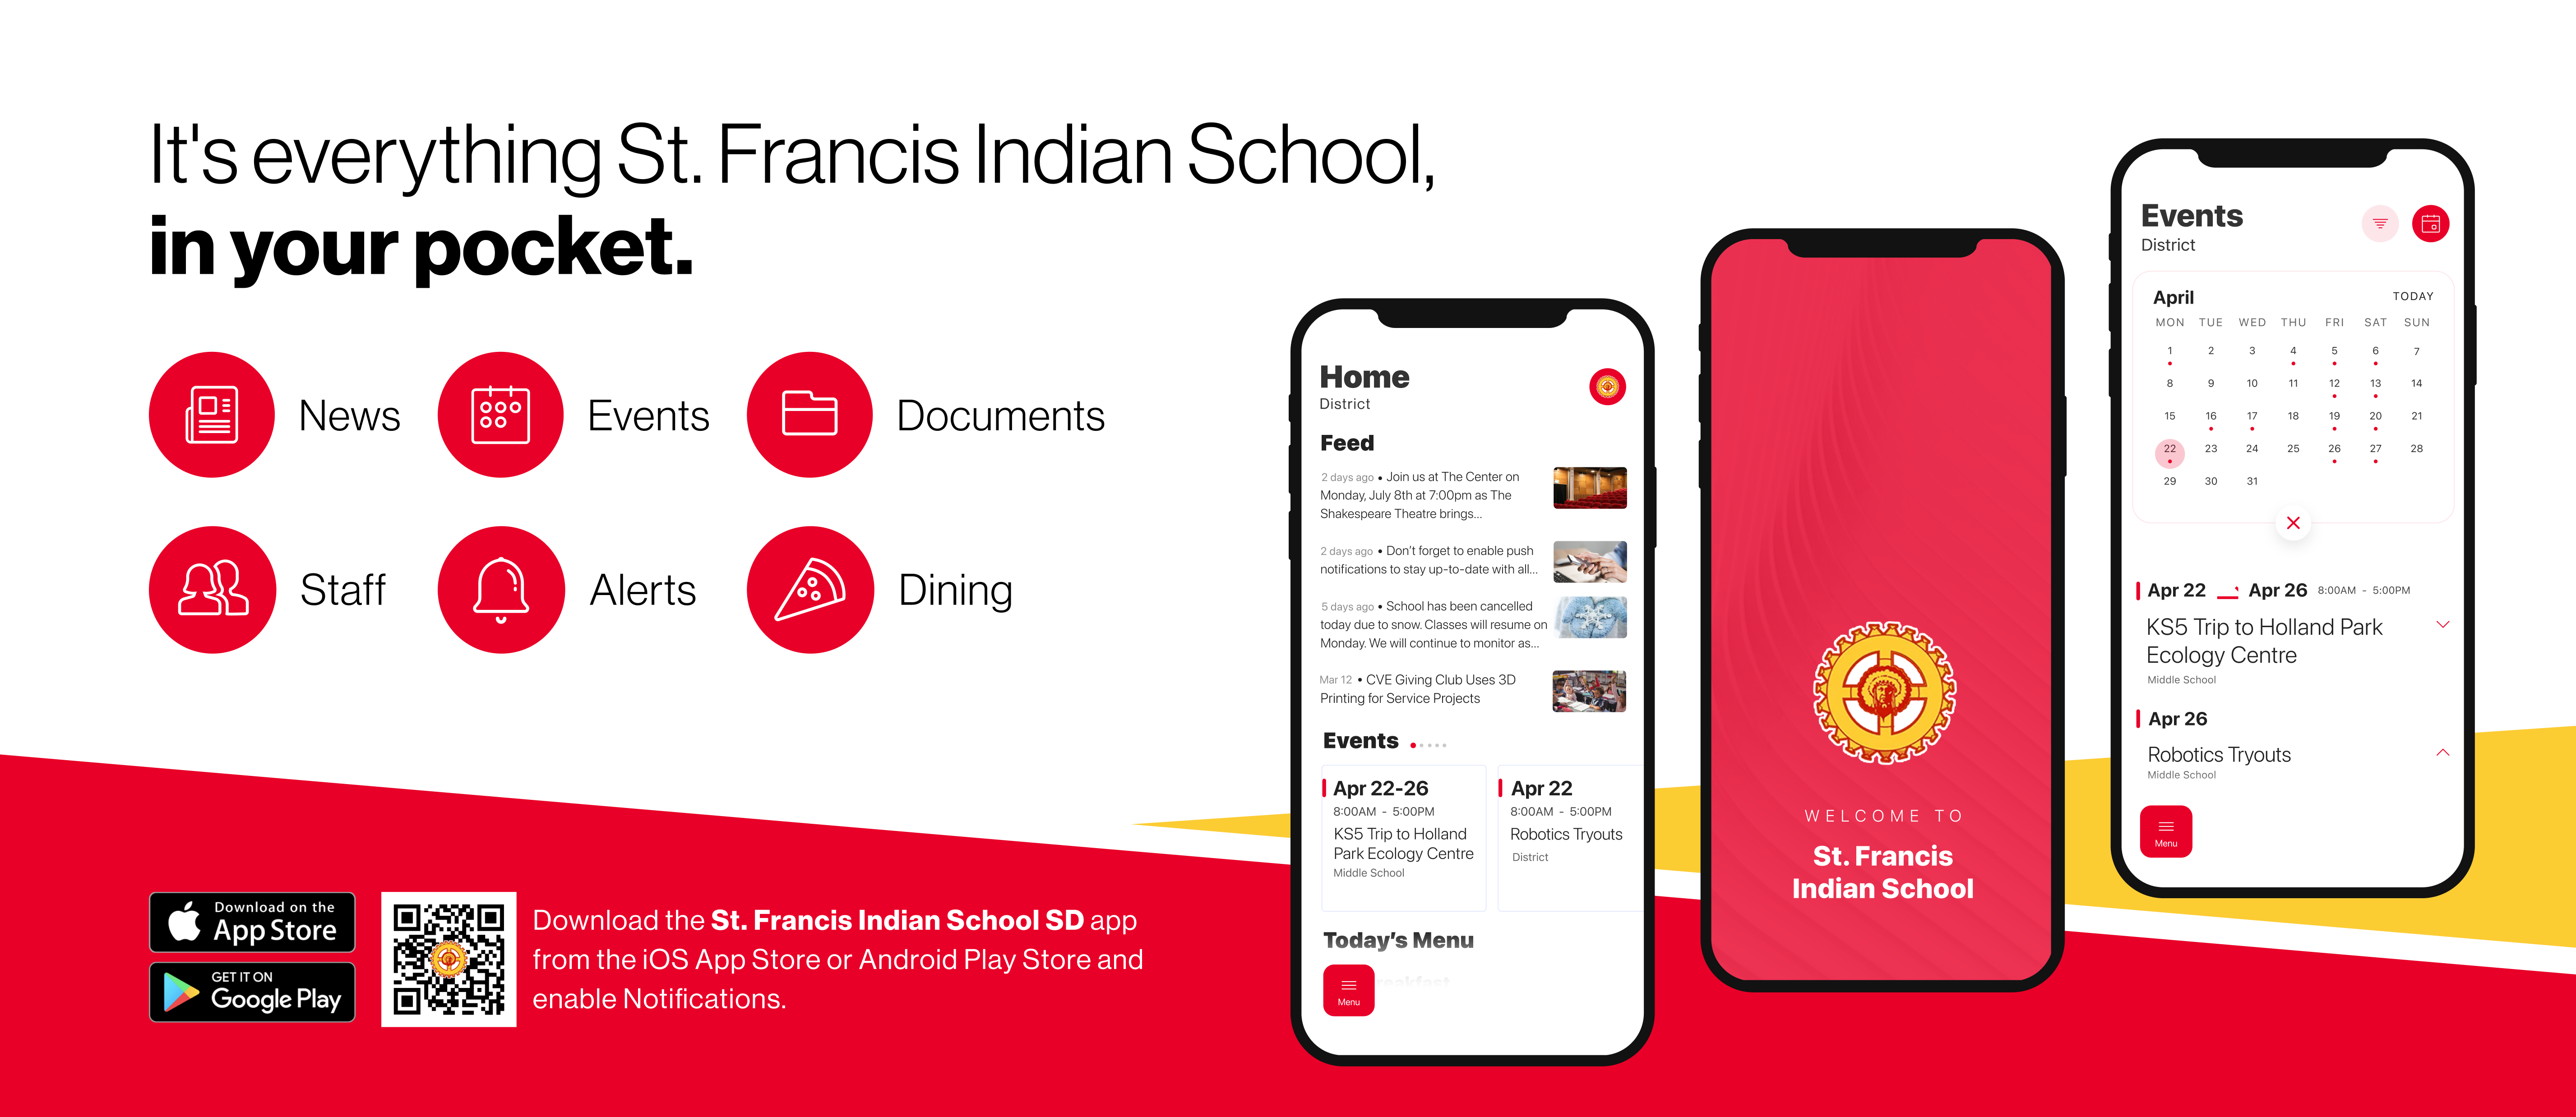 New App For Saint Francis School. Please call for more information. 